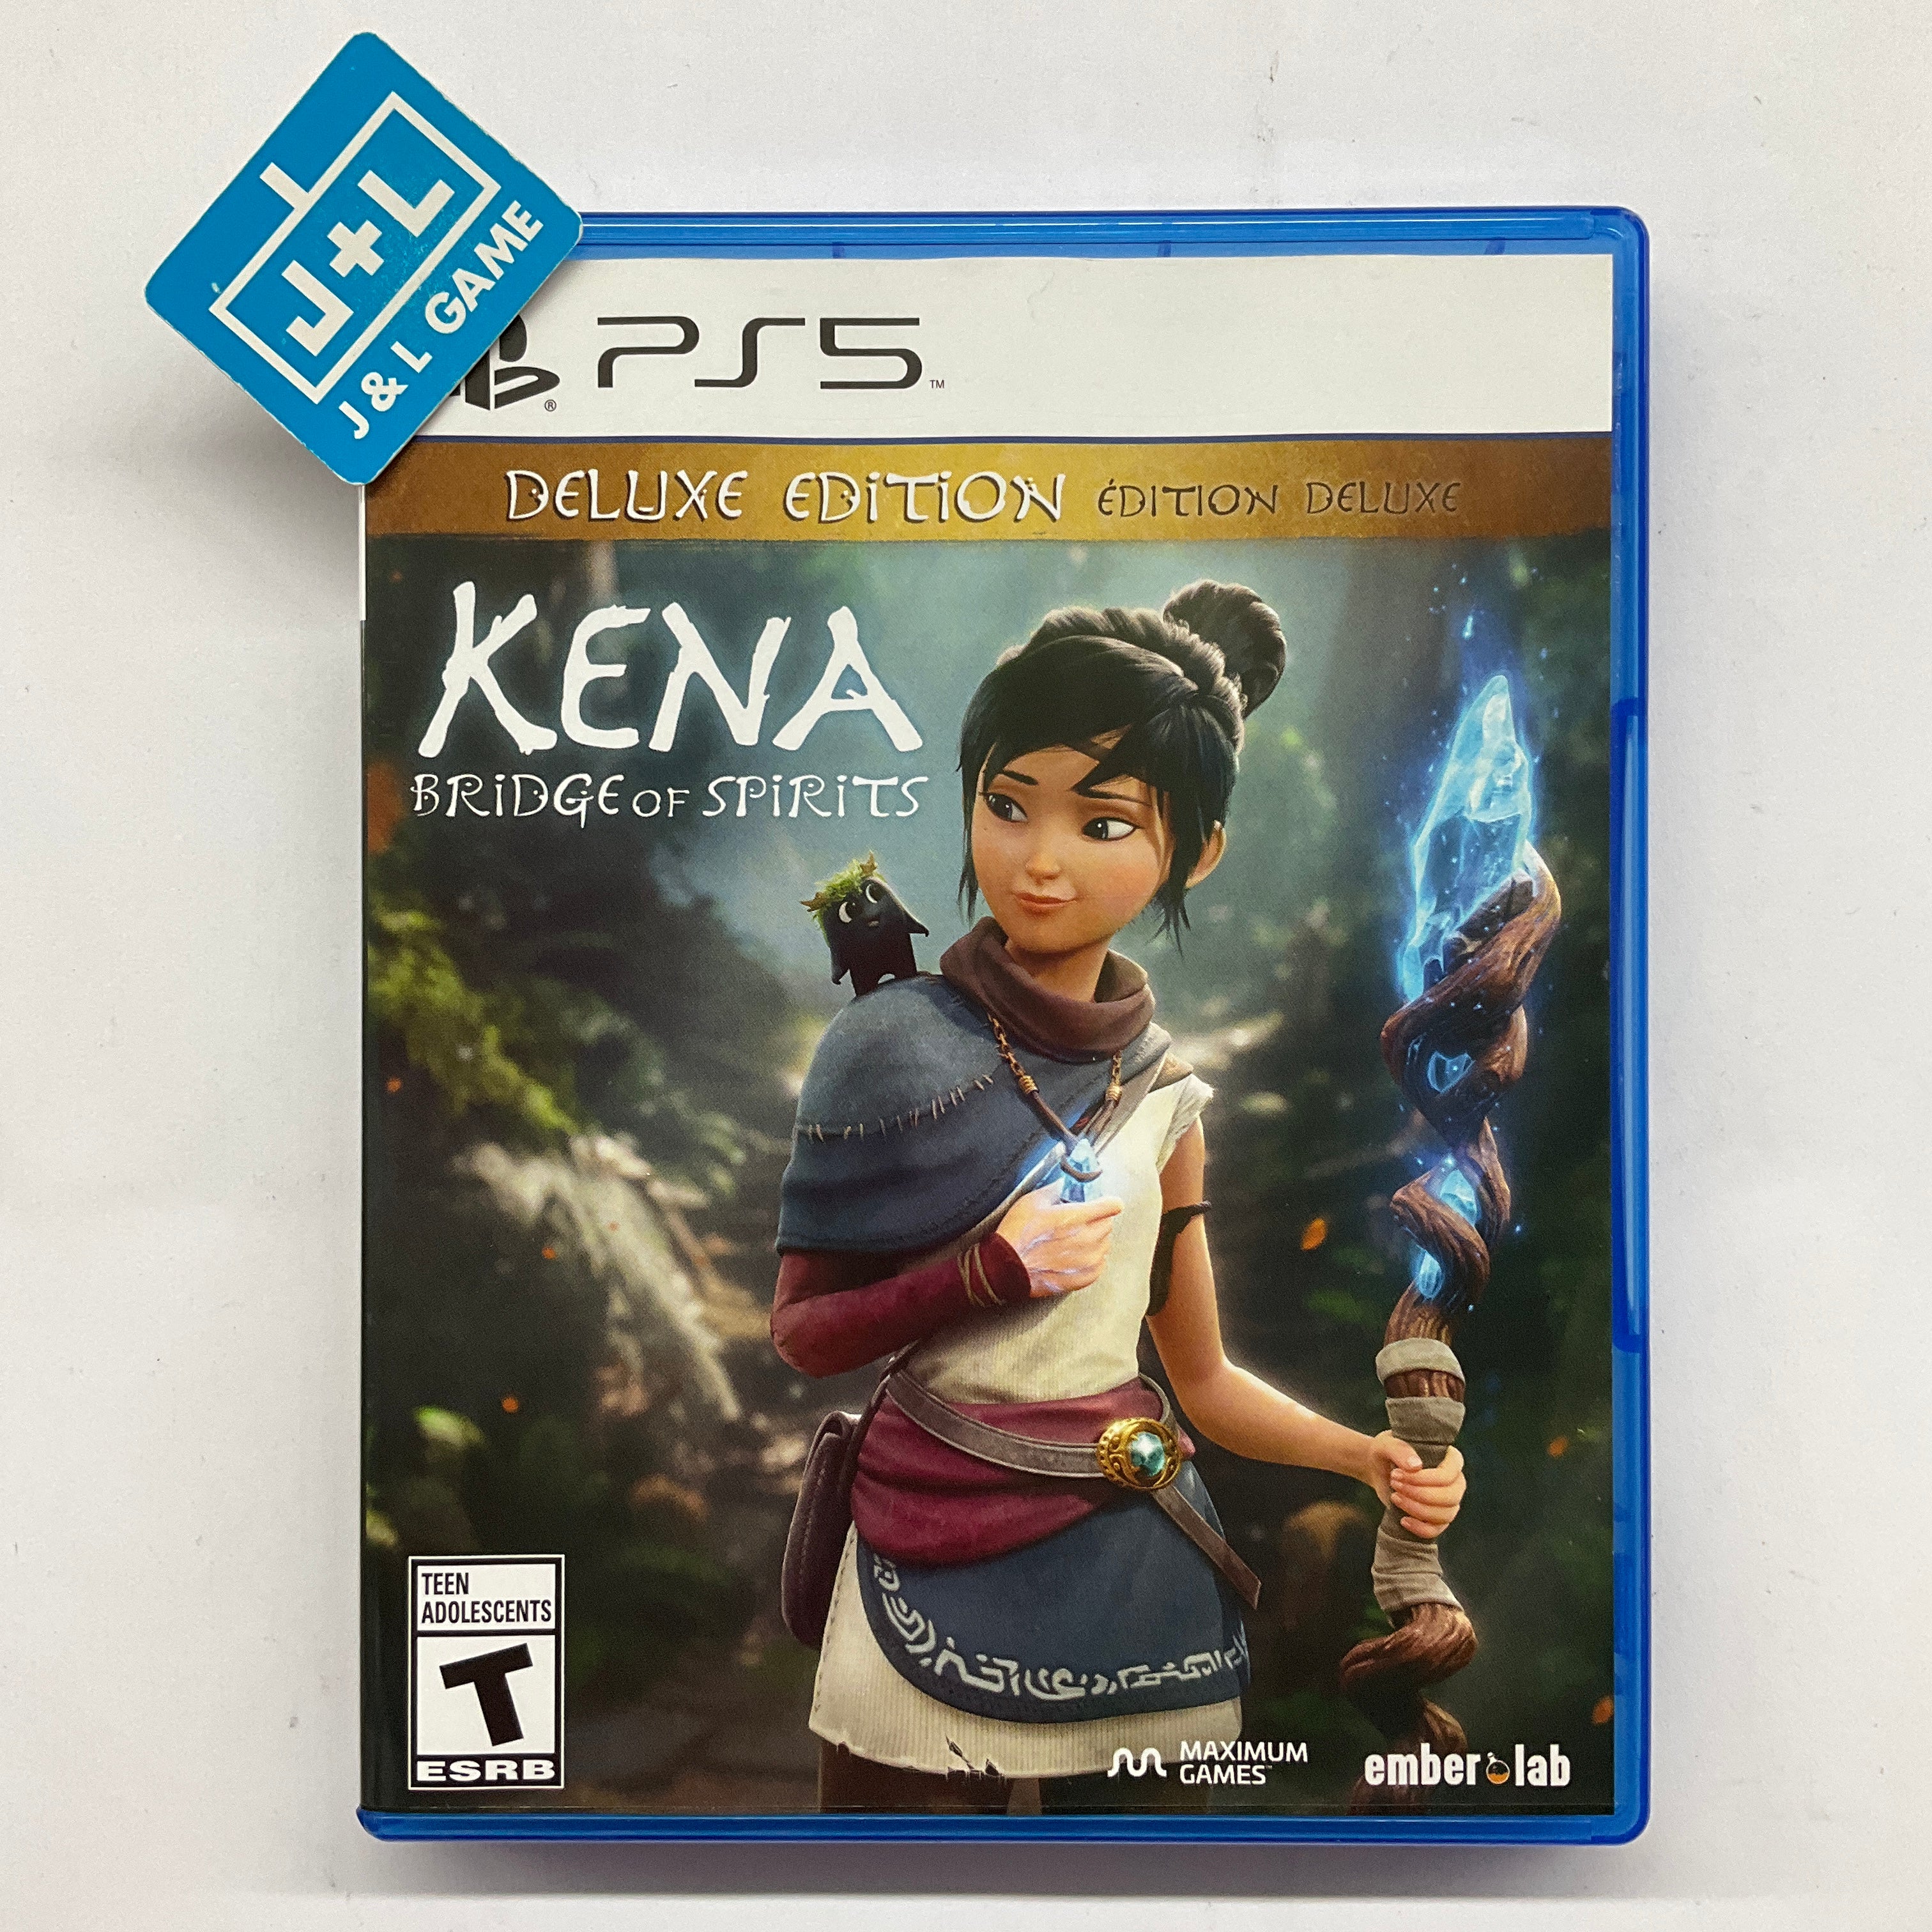 Kena: Bridge of Spirits (Deluxe Edition) - (PS5) PlayStation 5 [UNBOXING] Video Games Maximum Games   